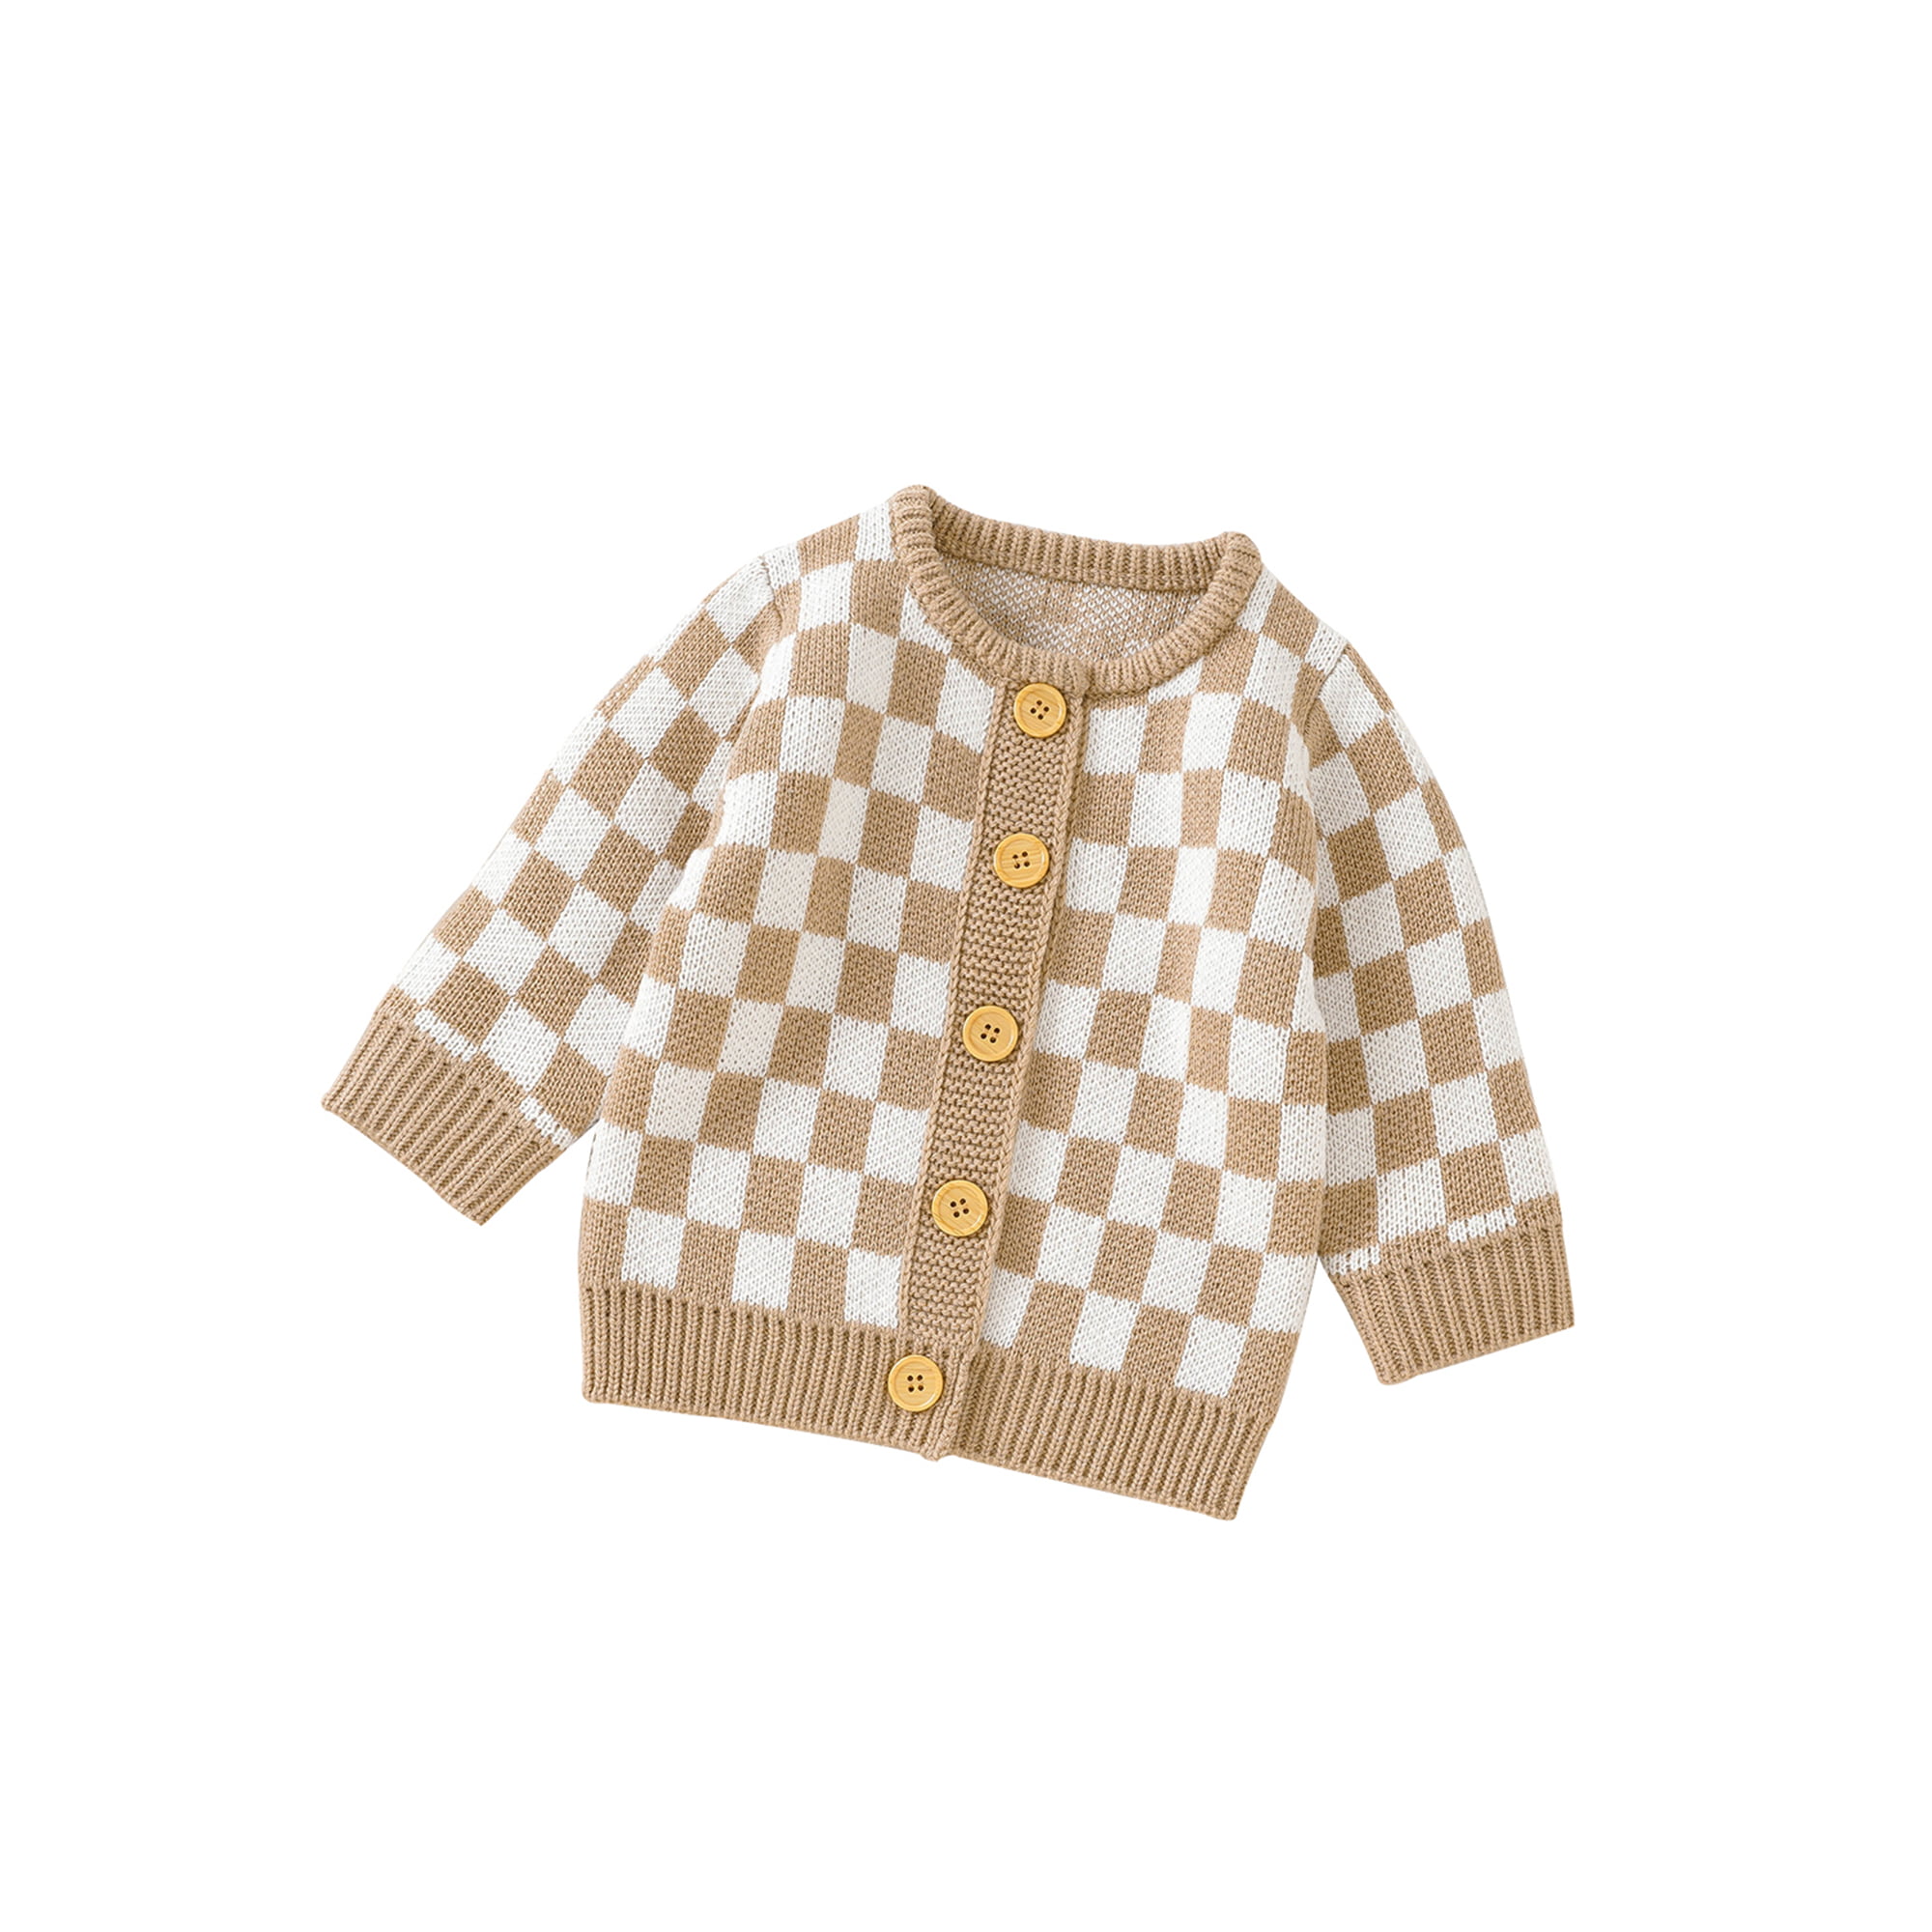 Canrulo Newborn Baby Girl Boy Knit Cardigan Sweater Checkerboard Long  Sleeve Button Sweater Coat Warm Fall Winter Clothes Camel 6-9 Months 